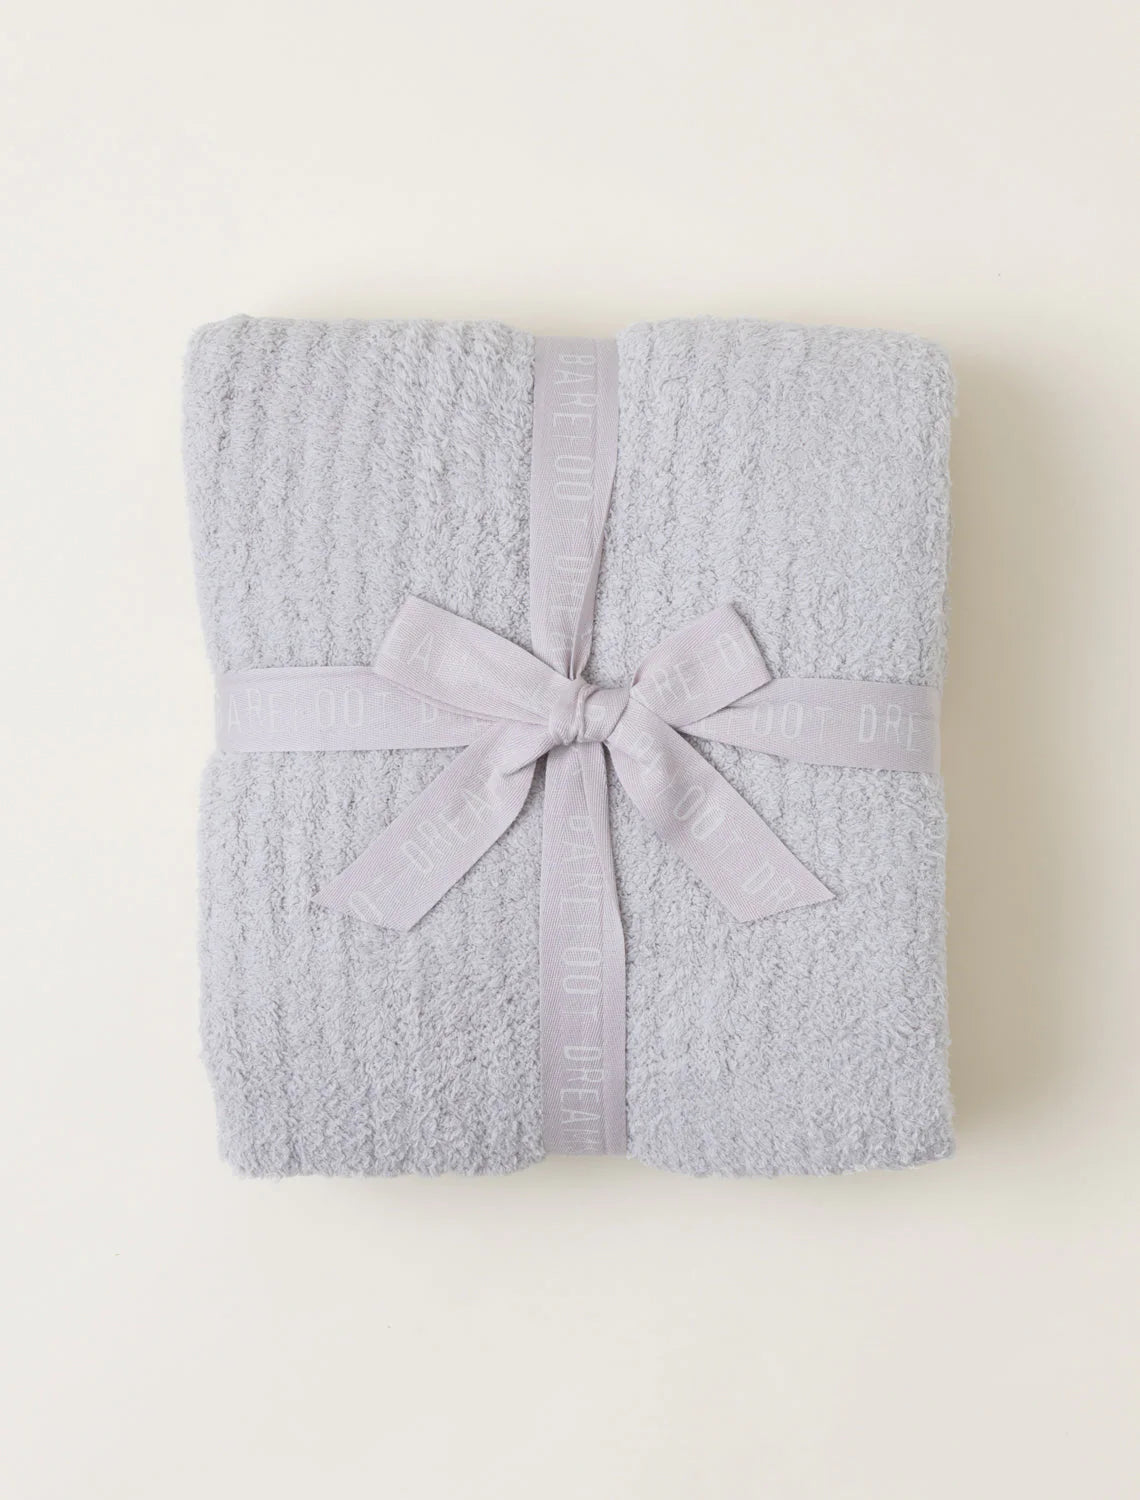 Cozychic Ribbed Throw Collection